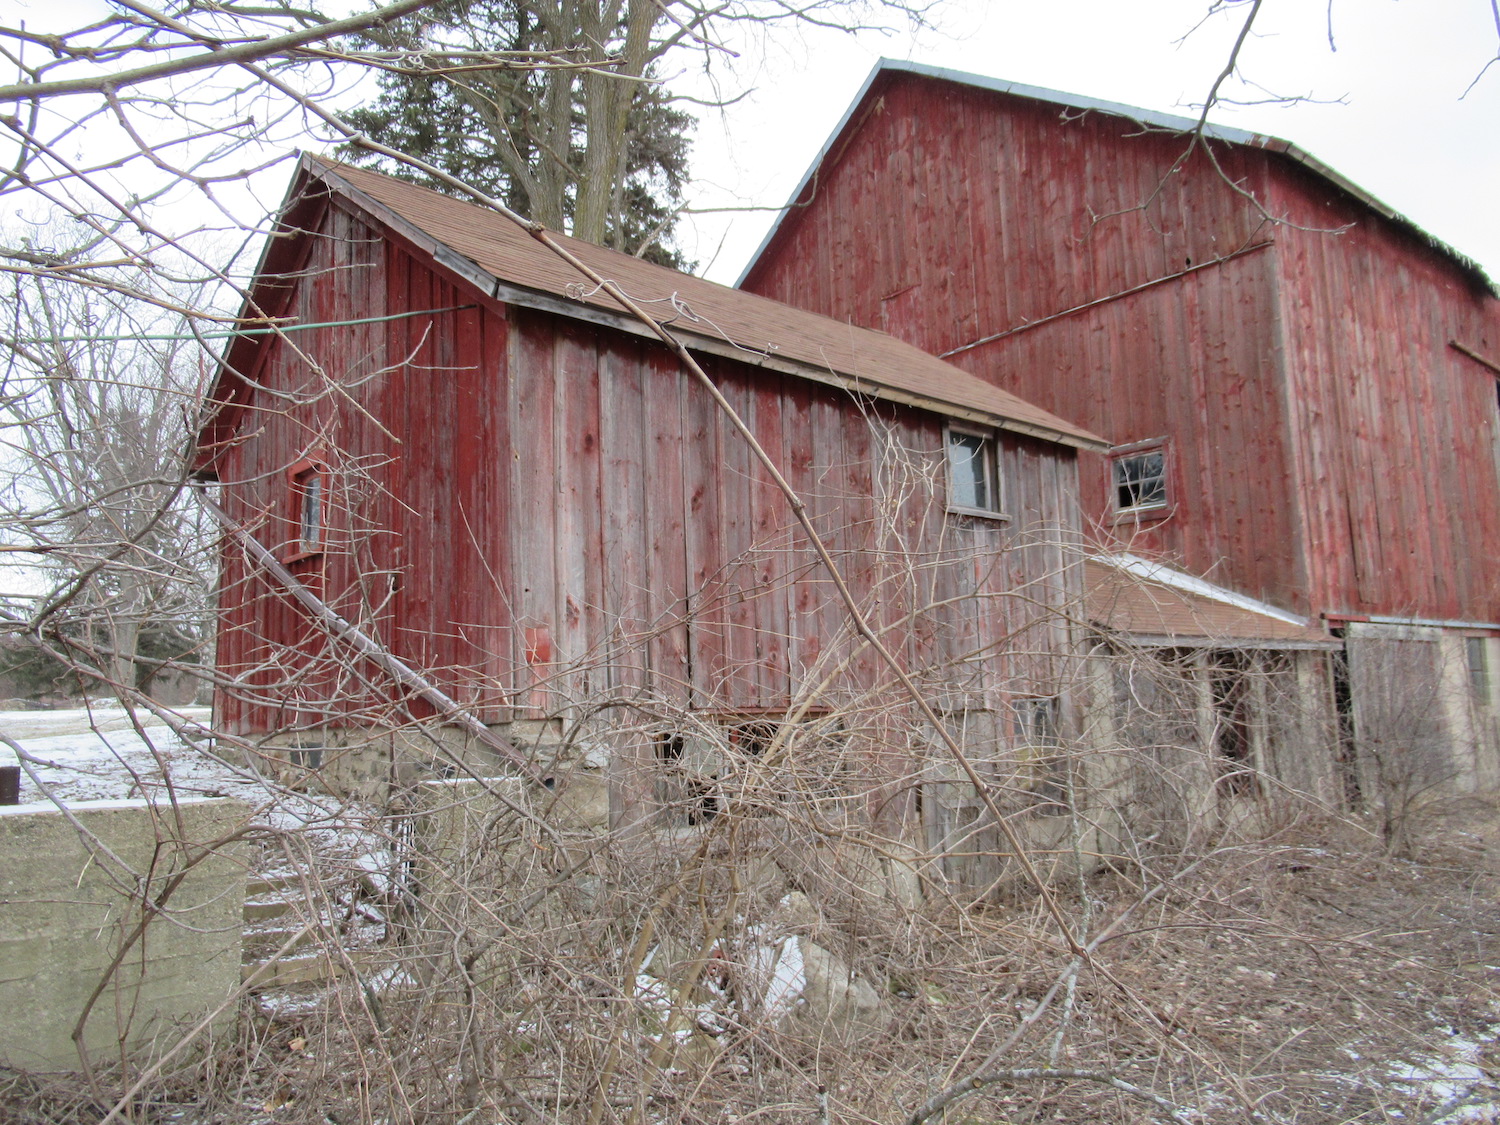 A red dairy barn that was on a farm in Dexter, Michigan